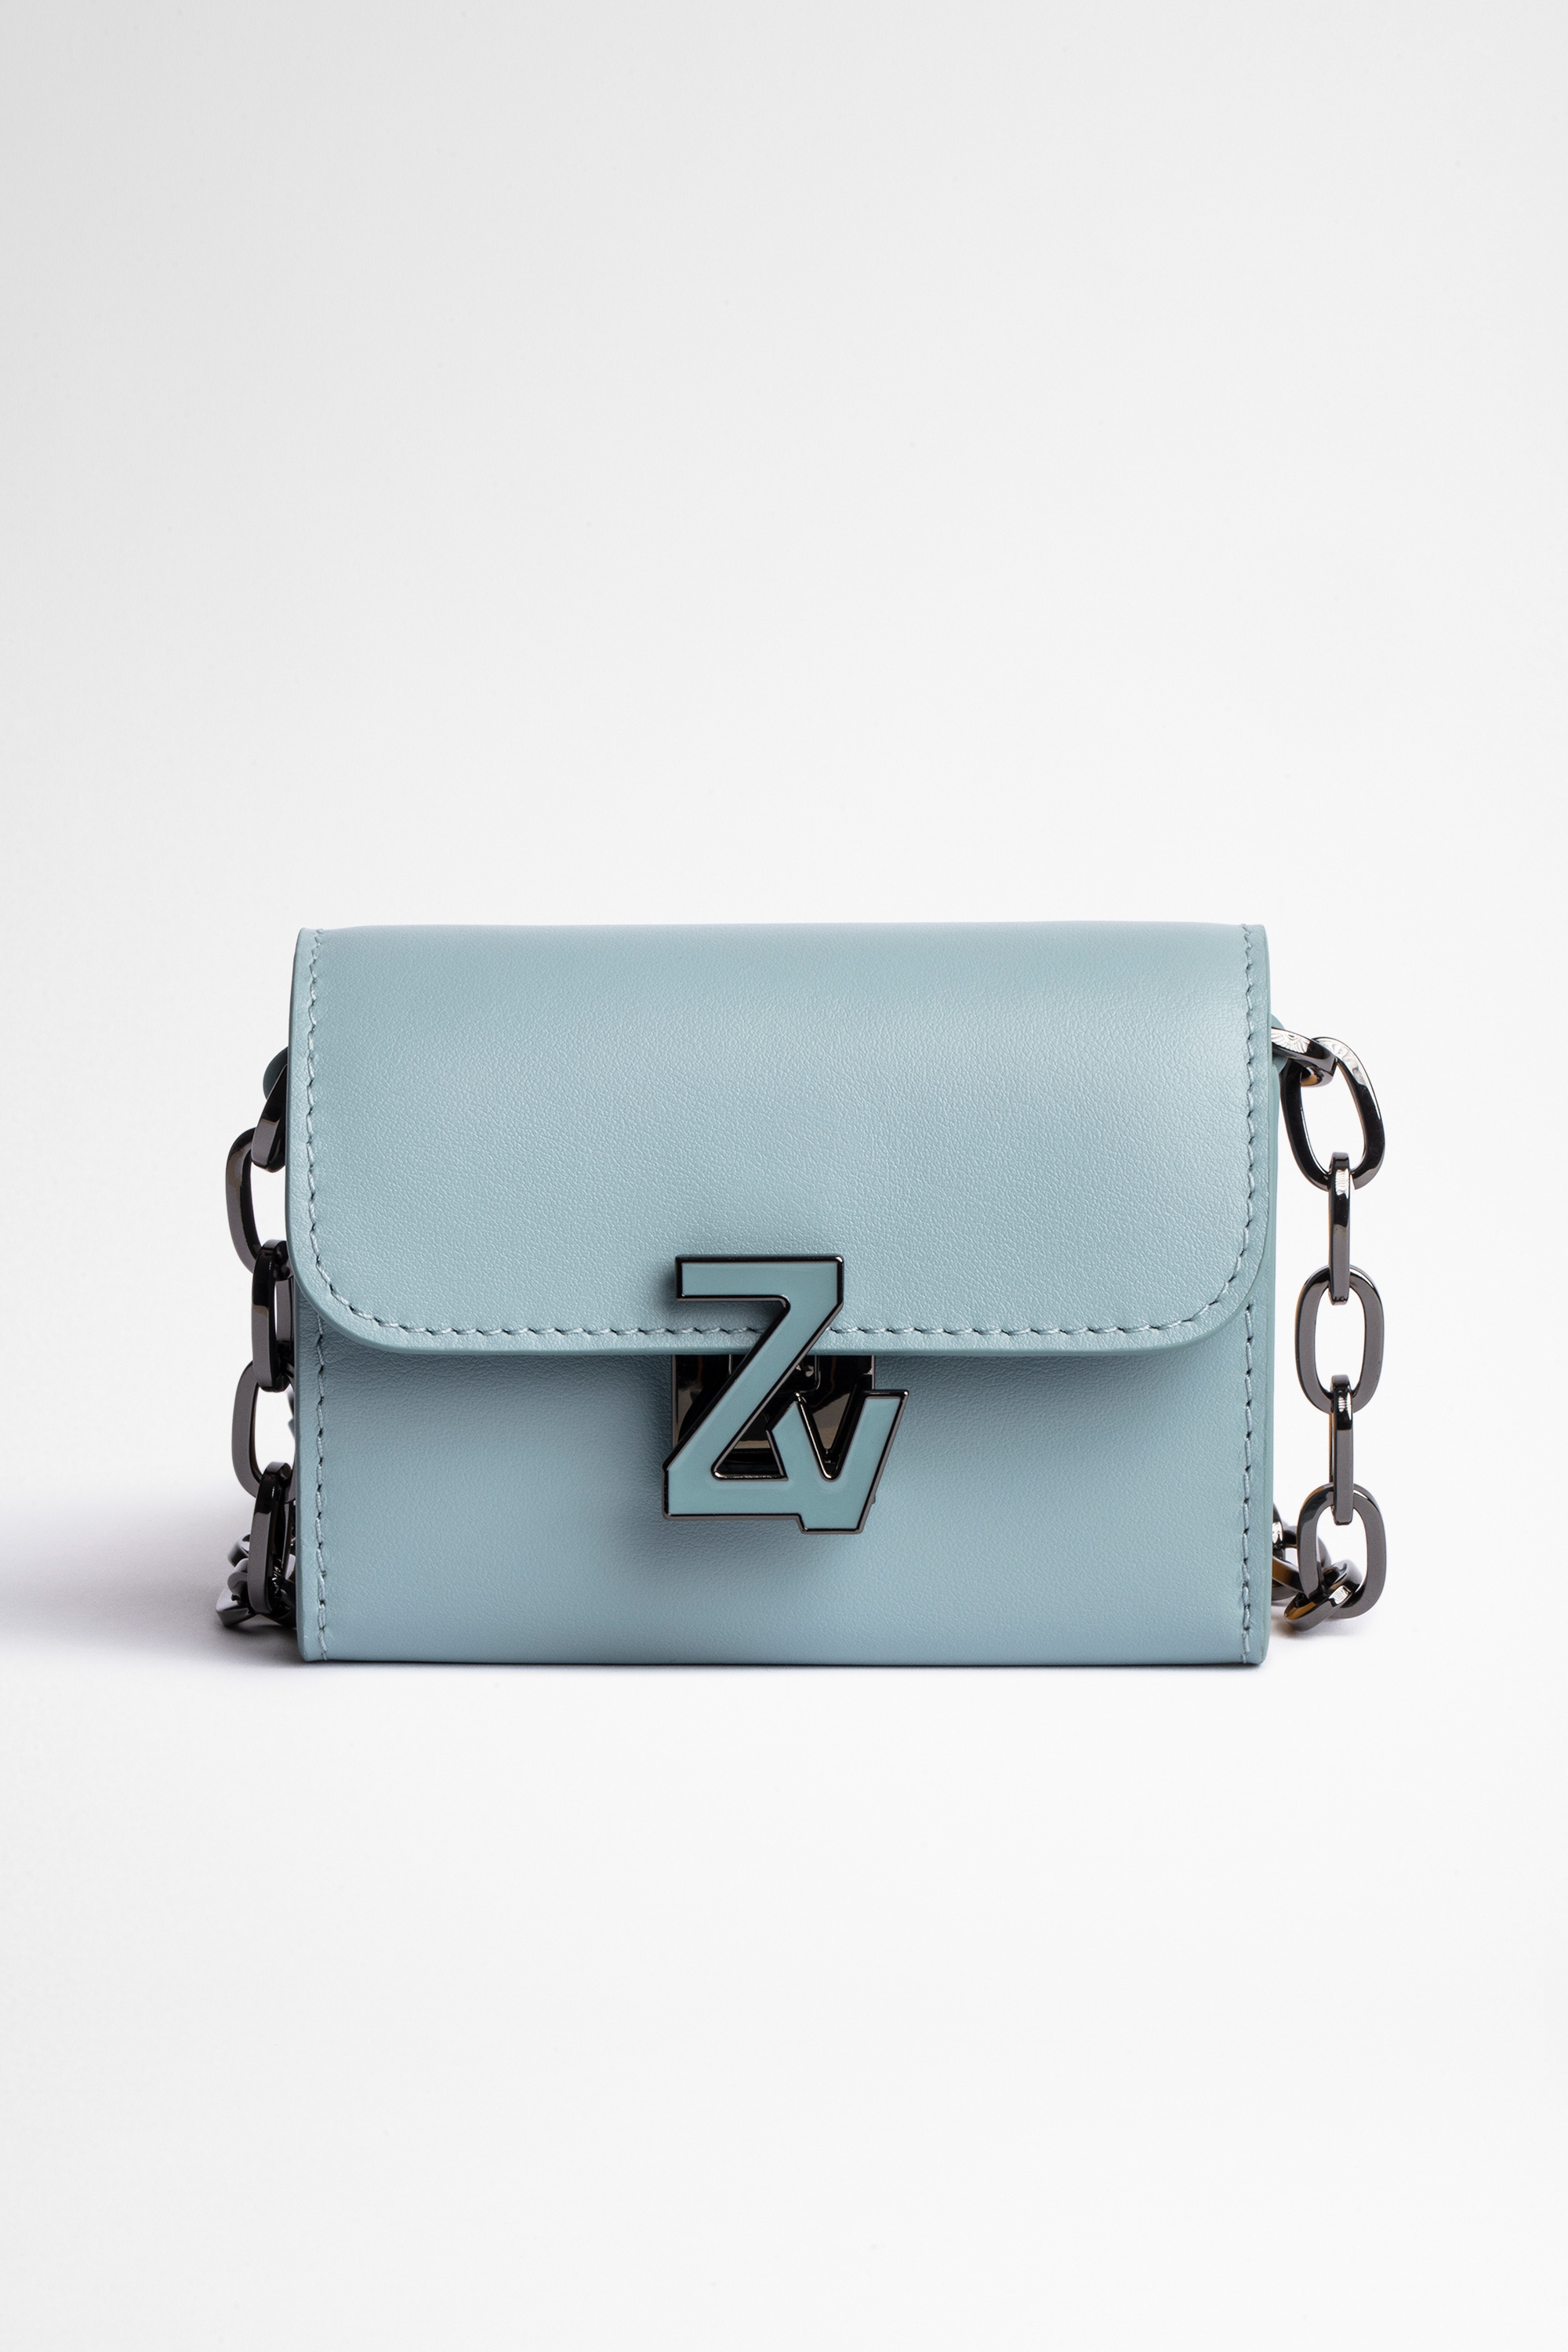 ZV Initiale Tiny Unchained Bag